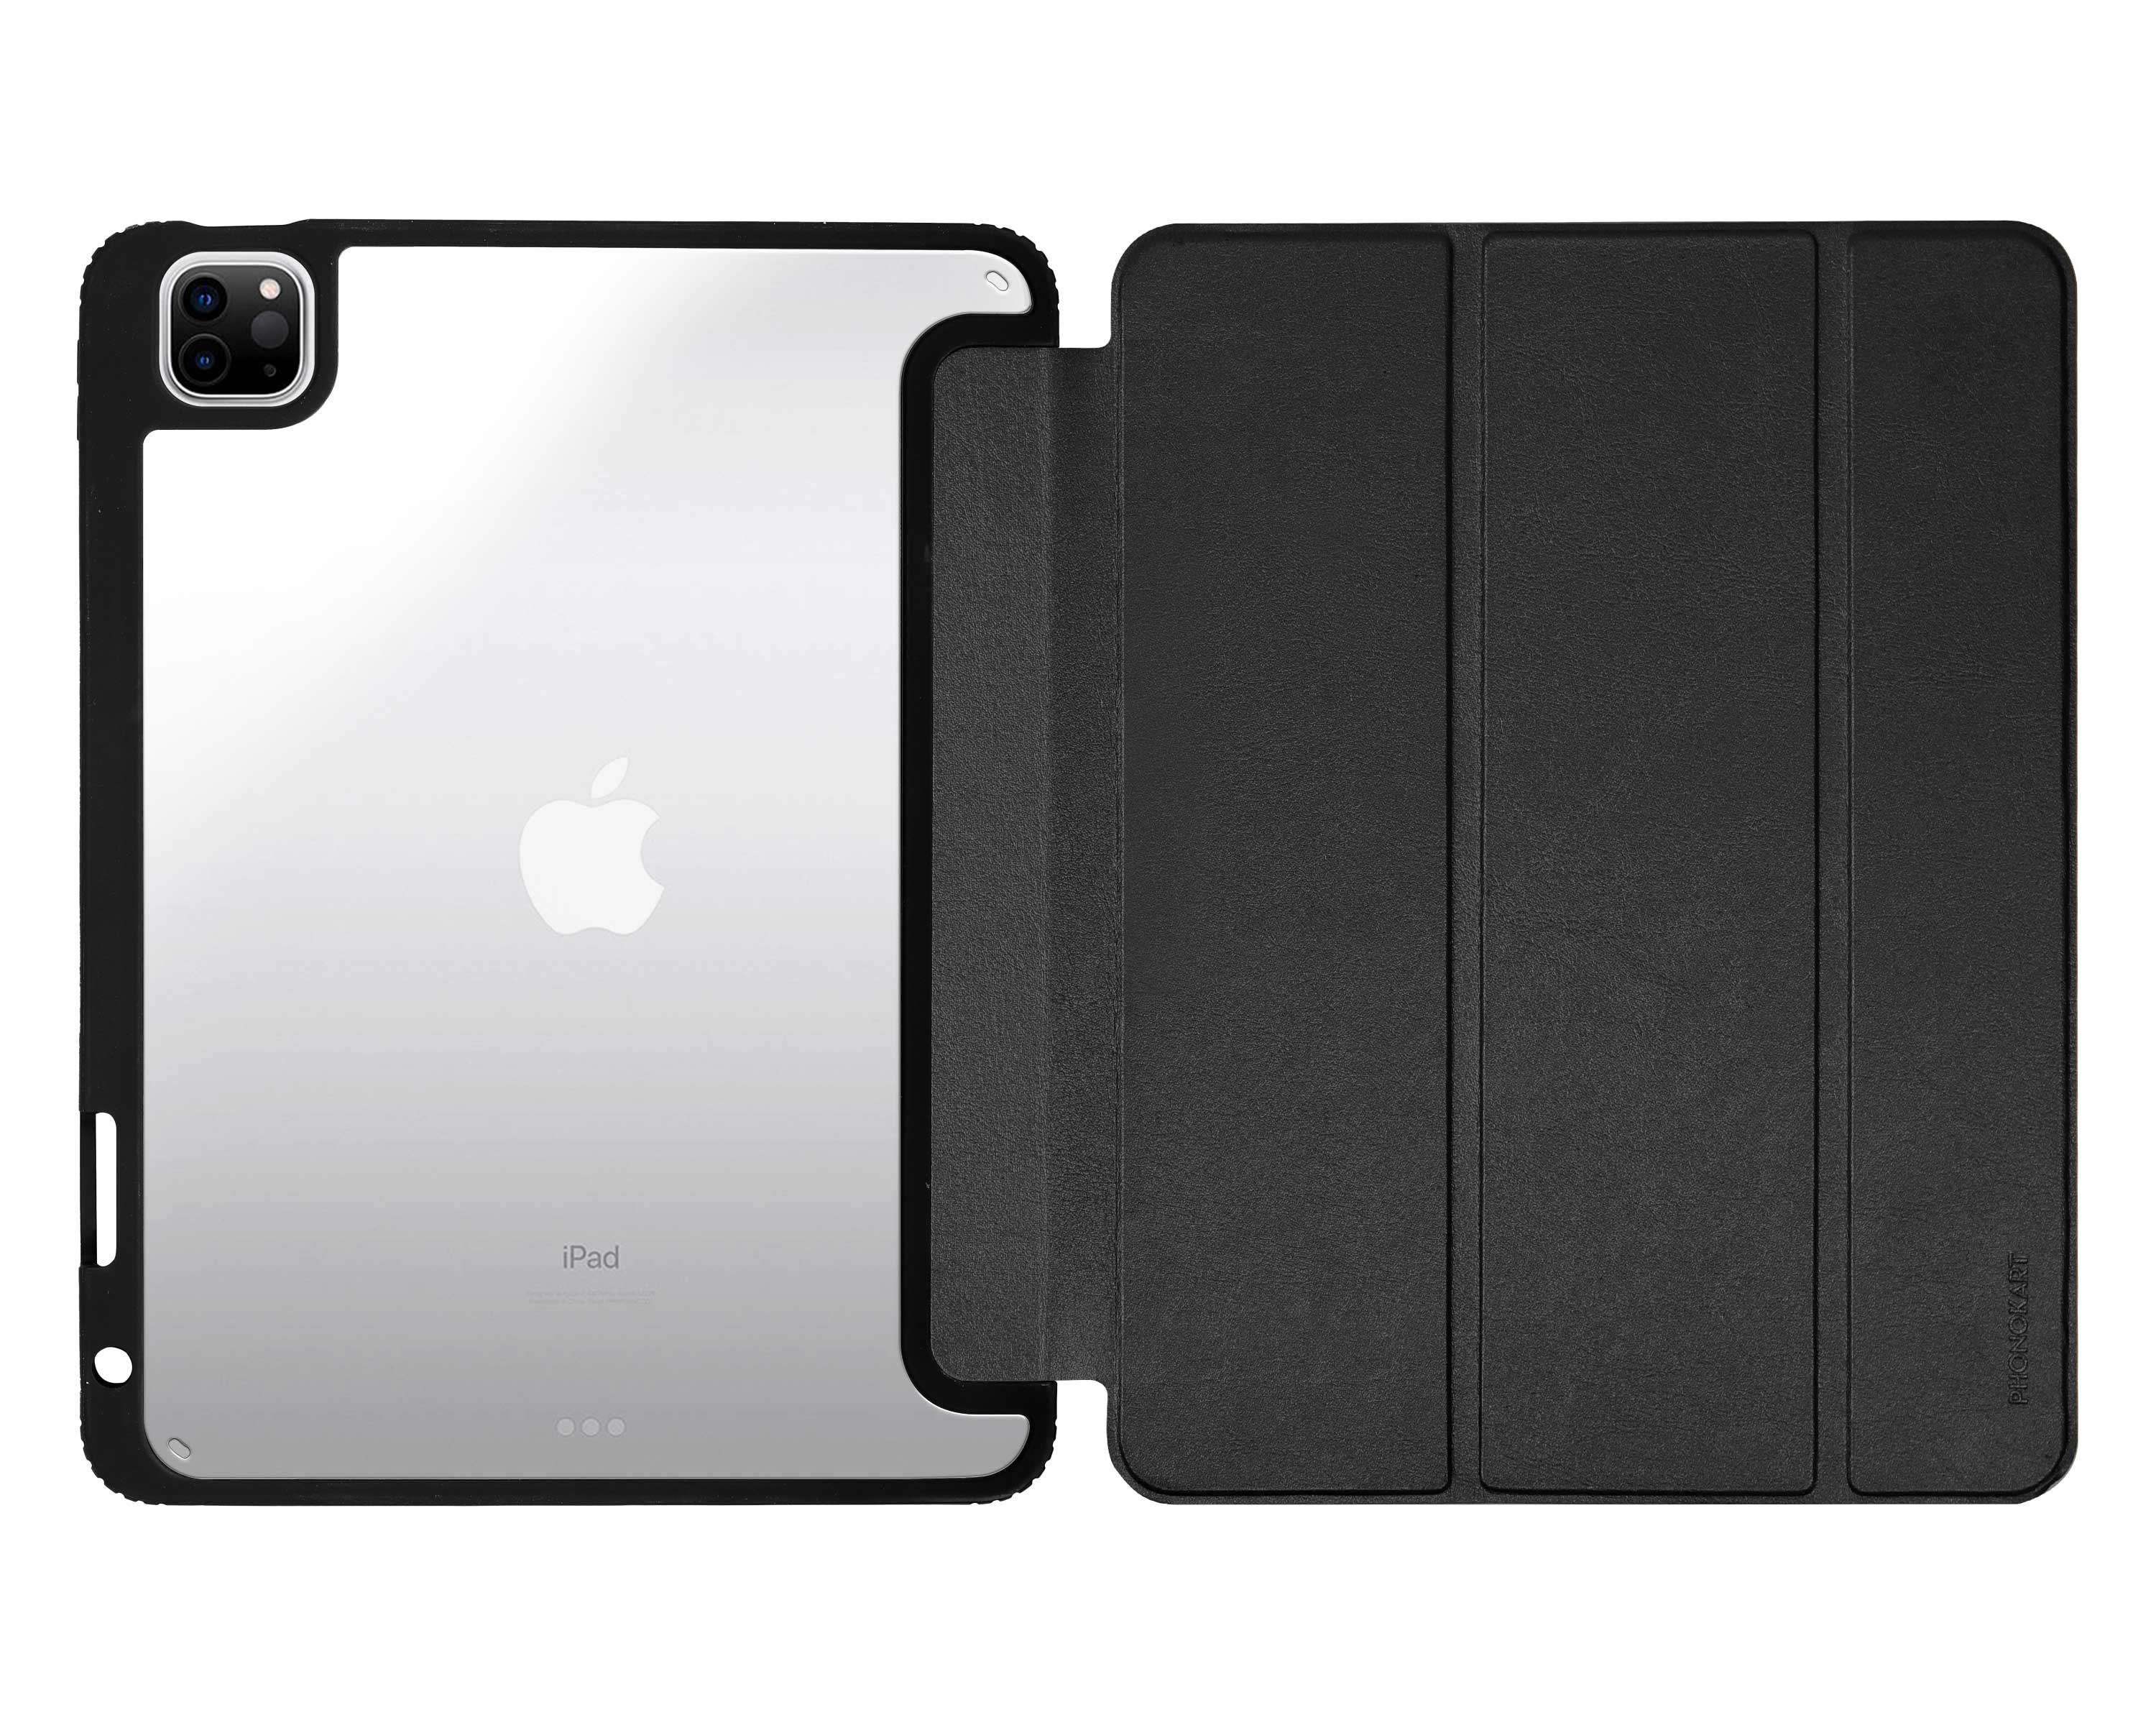 ARMOR FLIP CASE FOR IPAD 12.9 INCH WITH PENCIL HOLDER (I Pad Pro 1,2,3,4,5,6th Gen)